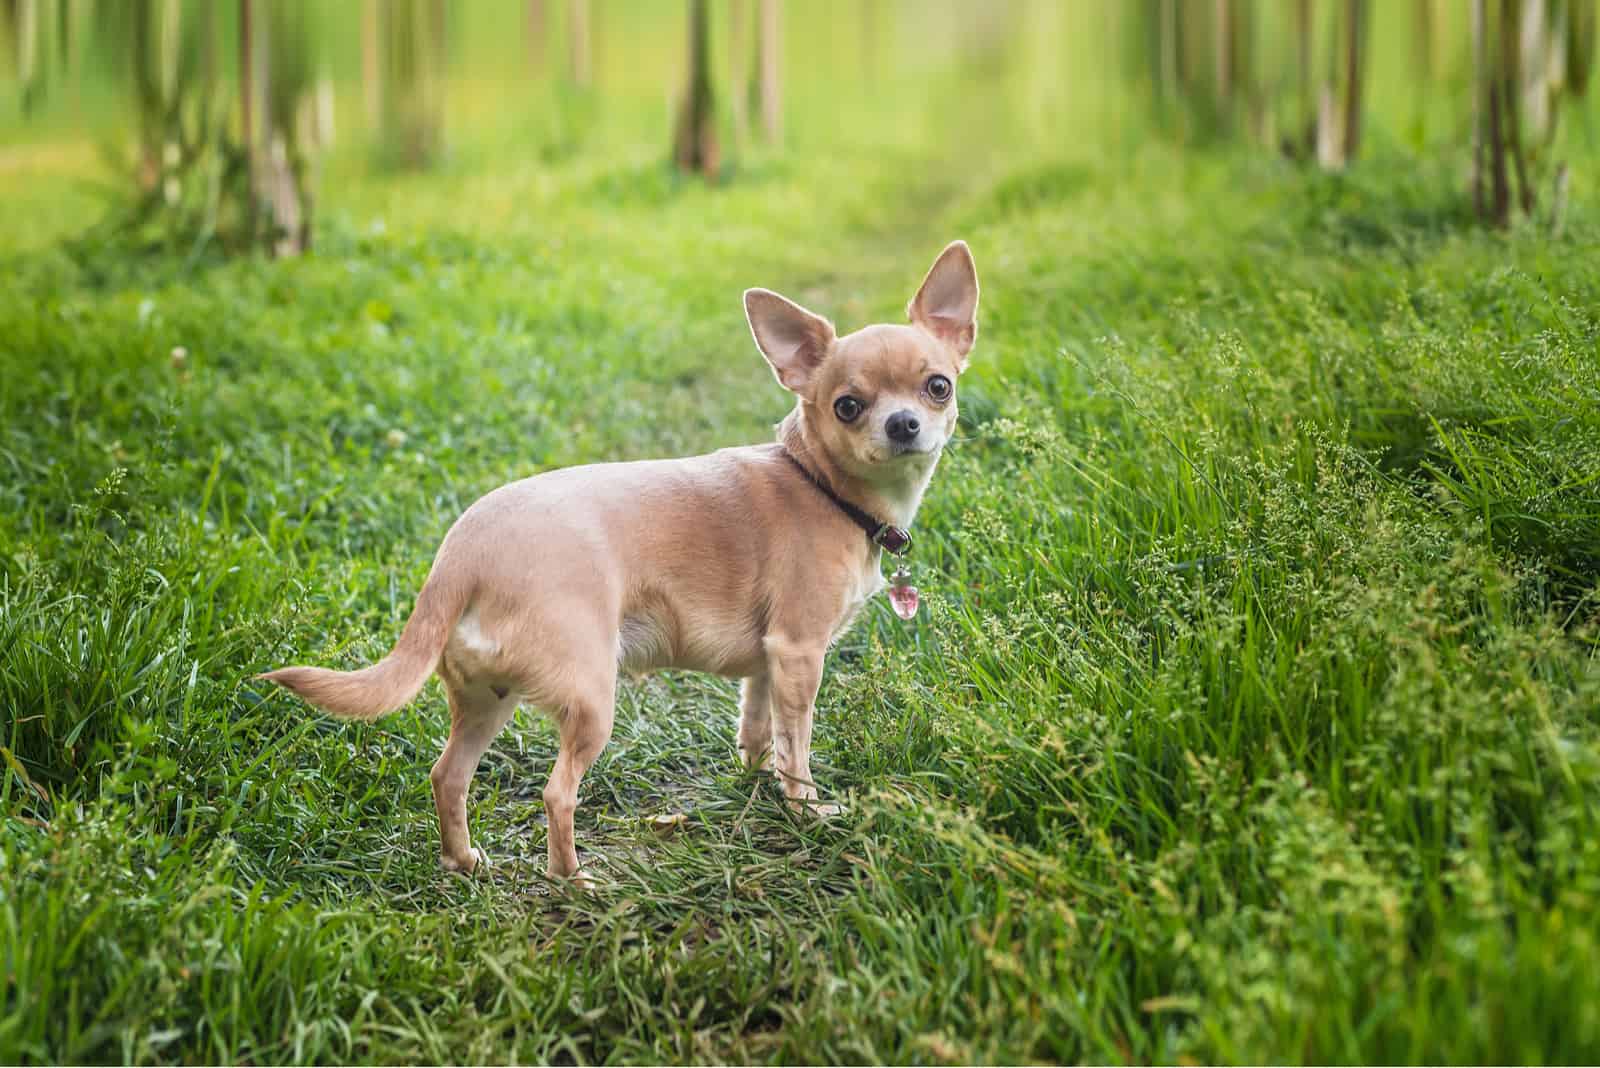 Chihuahua standing on grass outside